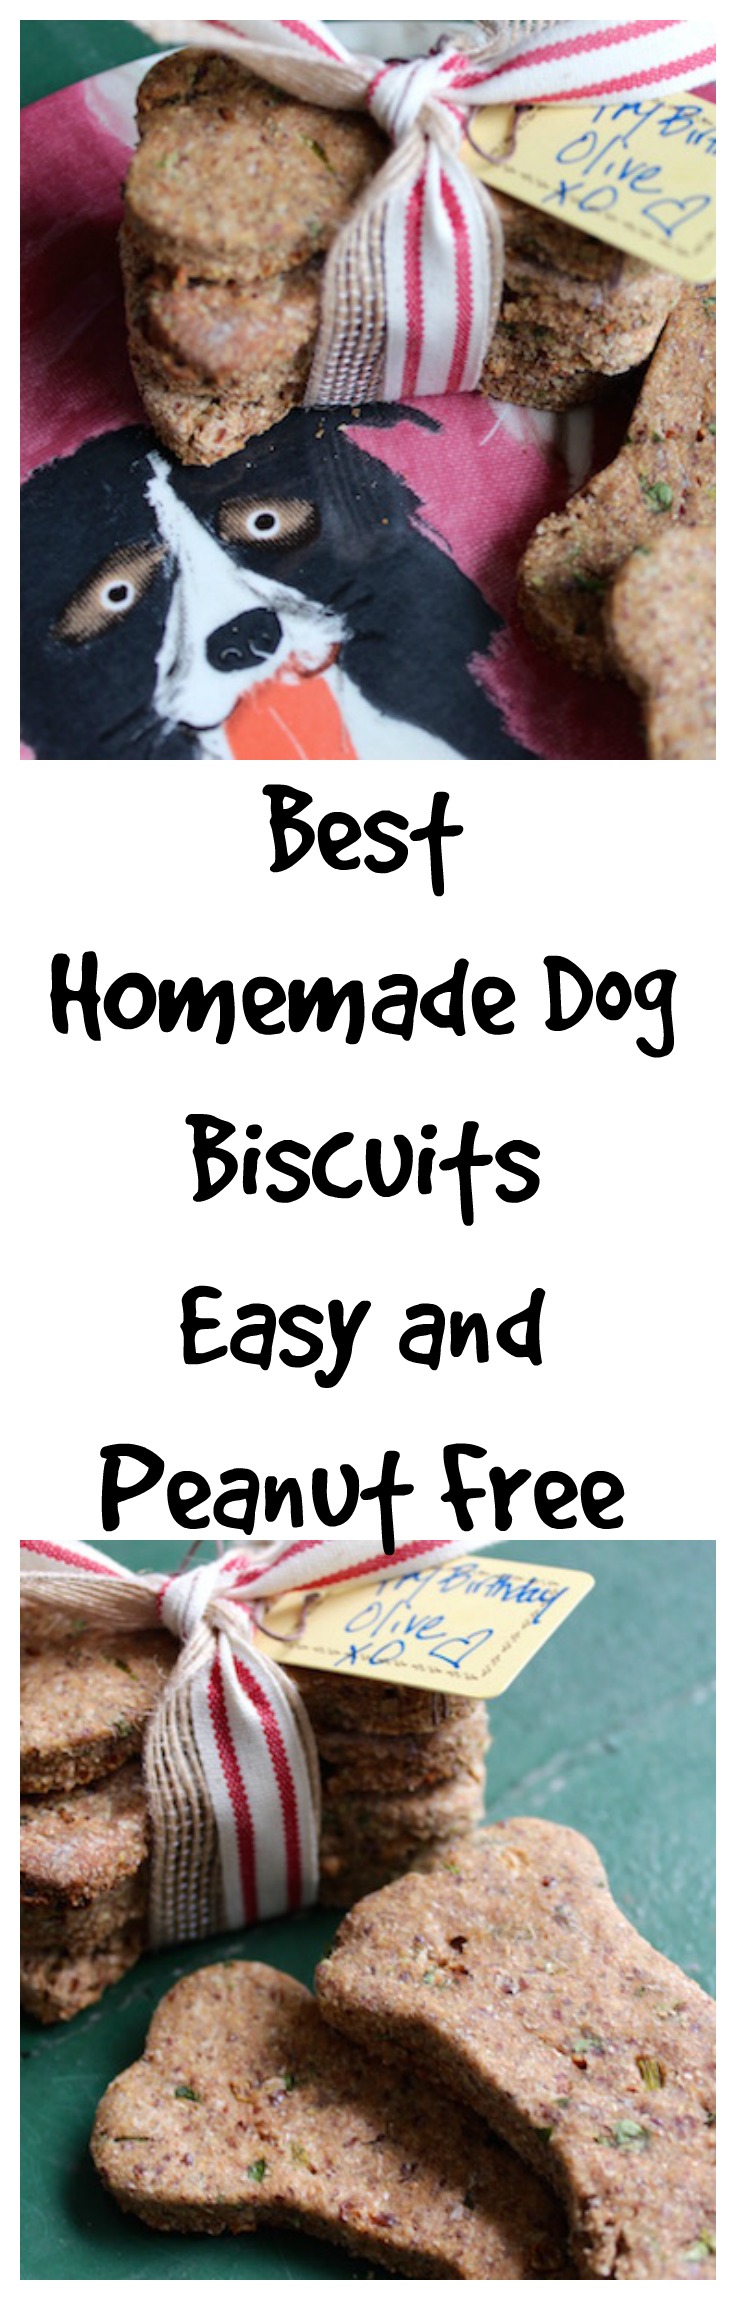 Homemade Dog Biscuits - easy and peanut free | DeliciousPerspective.com